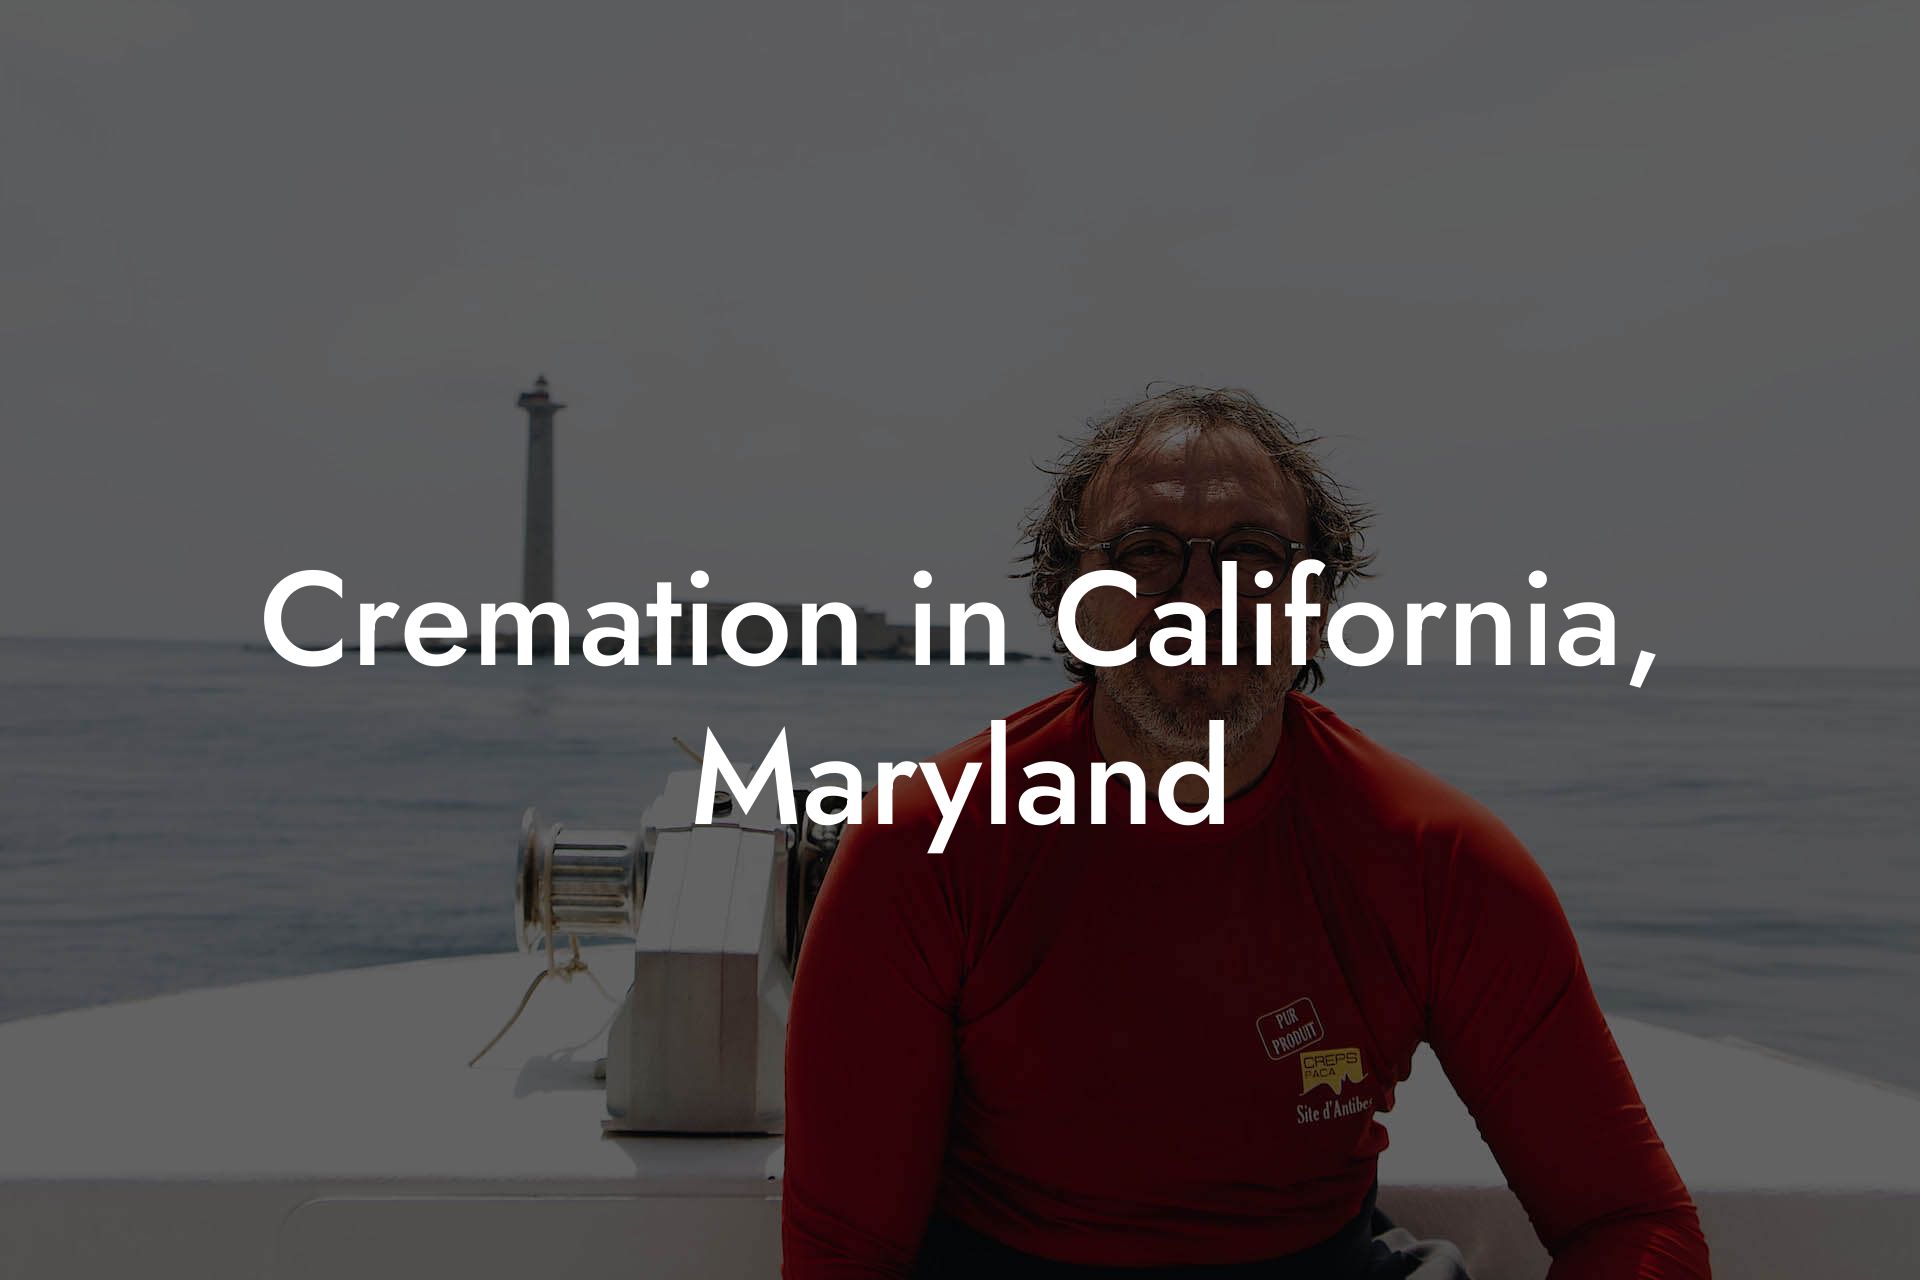 Cremation in California, Maryland